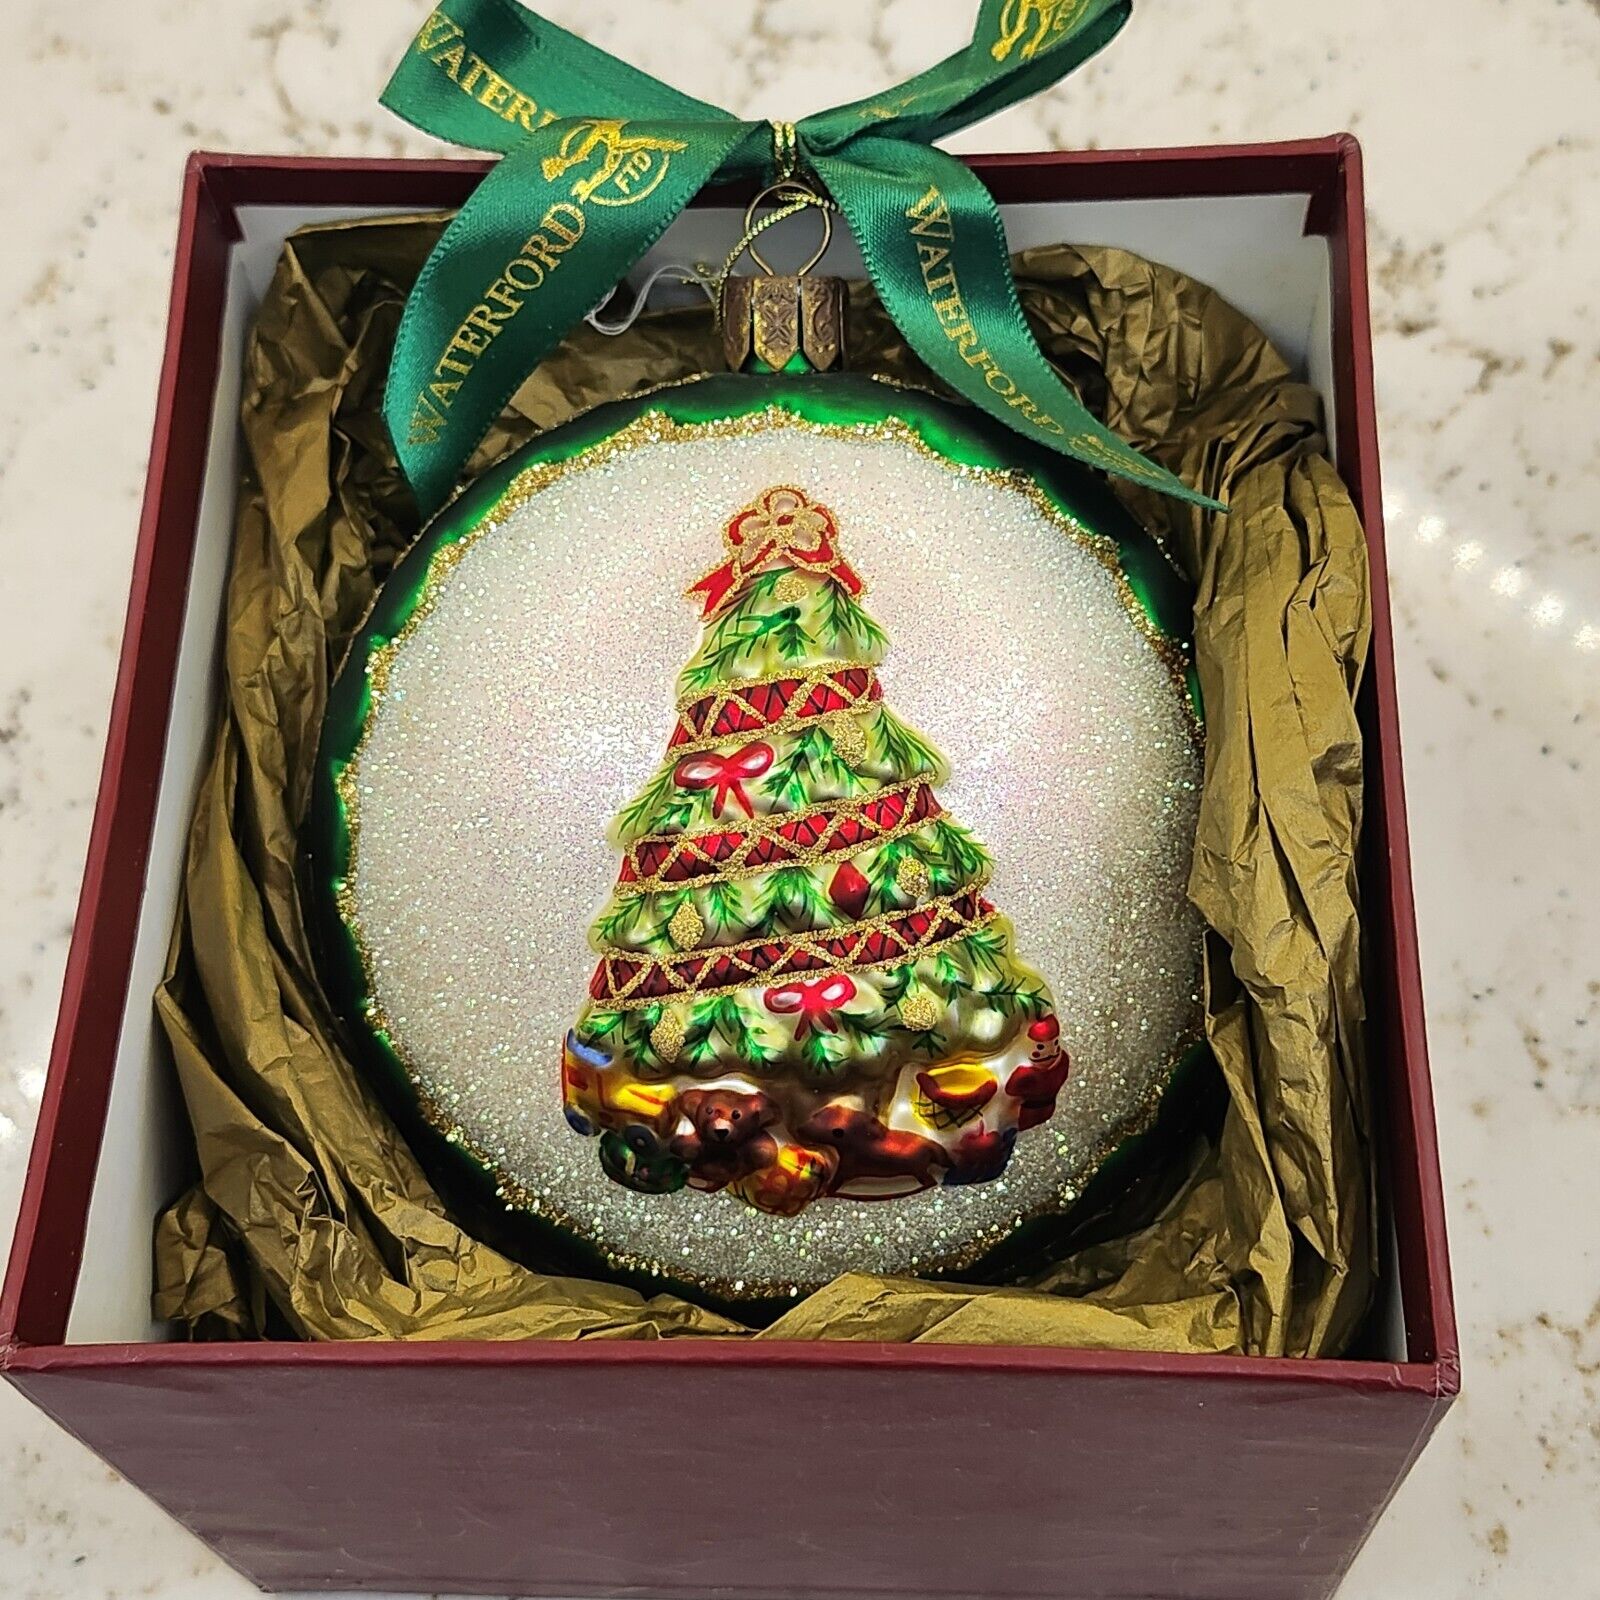 RARE 2003 Waterford Holiday Heirlooms Tree FTD Blown Glass Ornament With Box